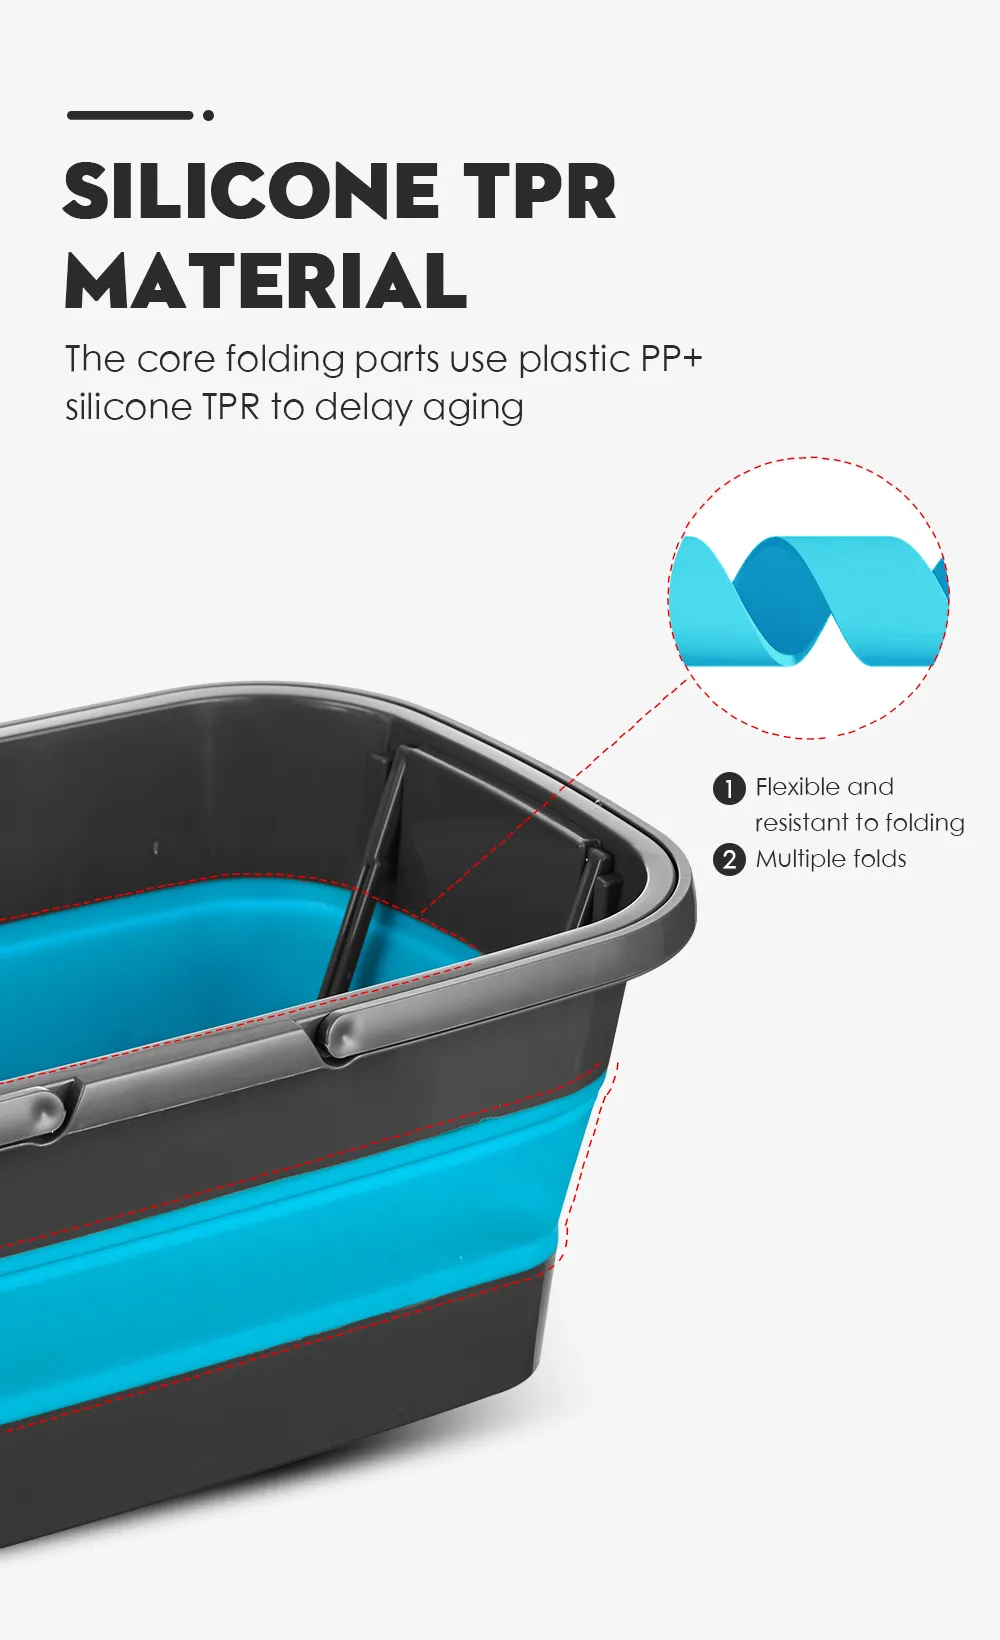 Portable Foldable Bucket Solid Basin Tourism Outdoor Clean Bucket Fishing  Promotion Camping Car Wash Mop Folding Bucket Outdoor